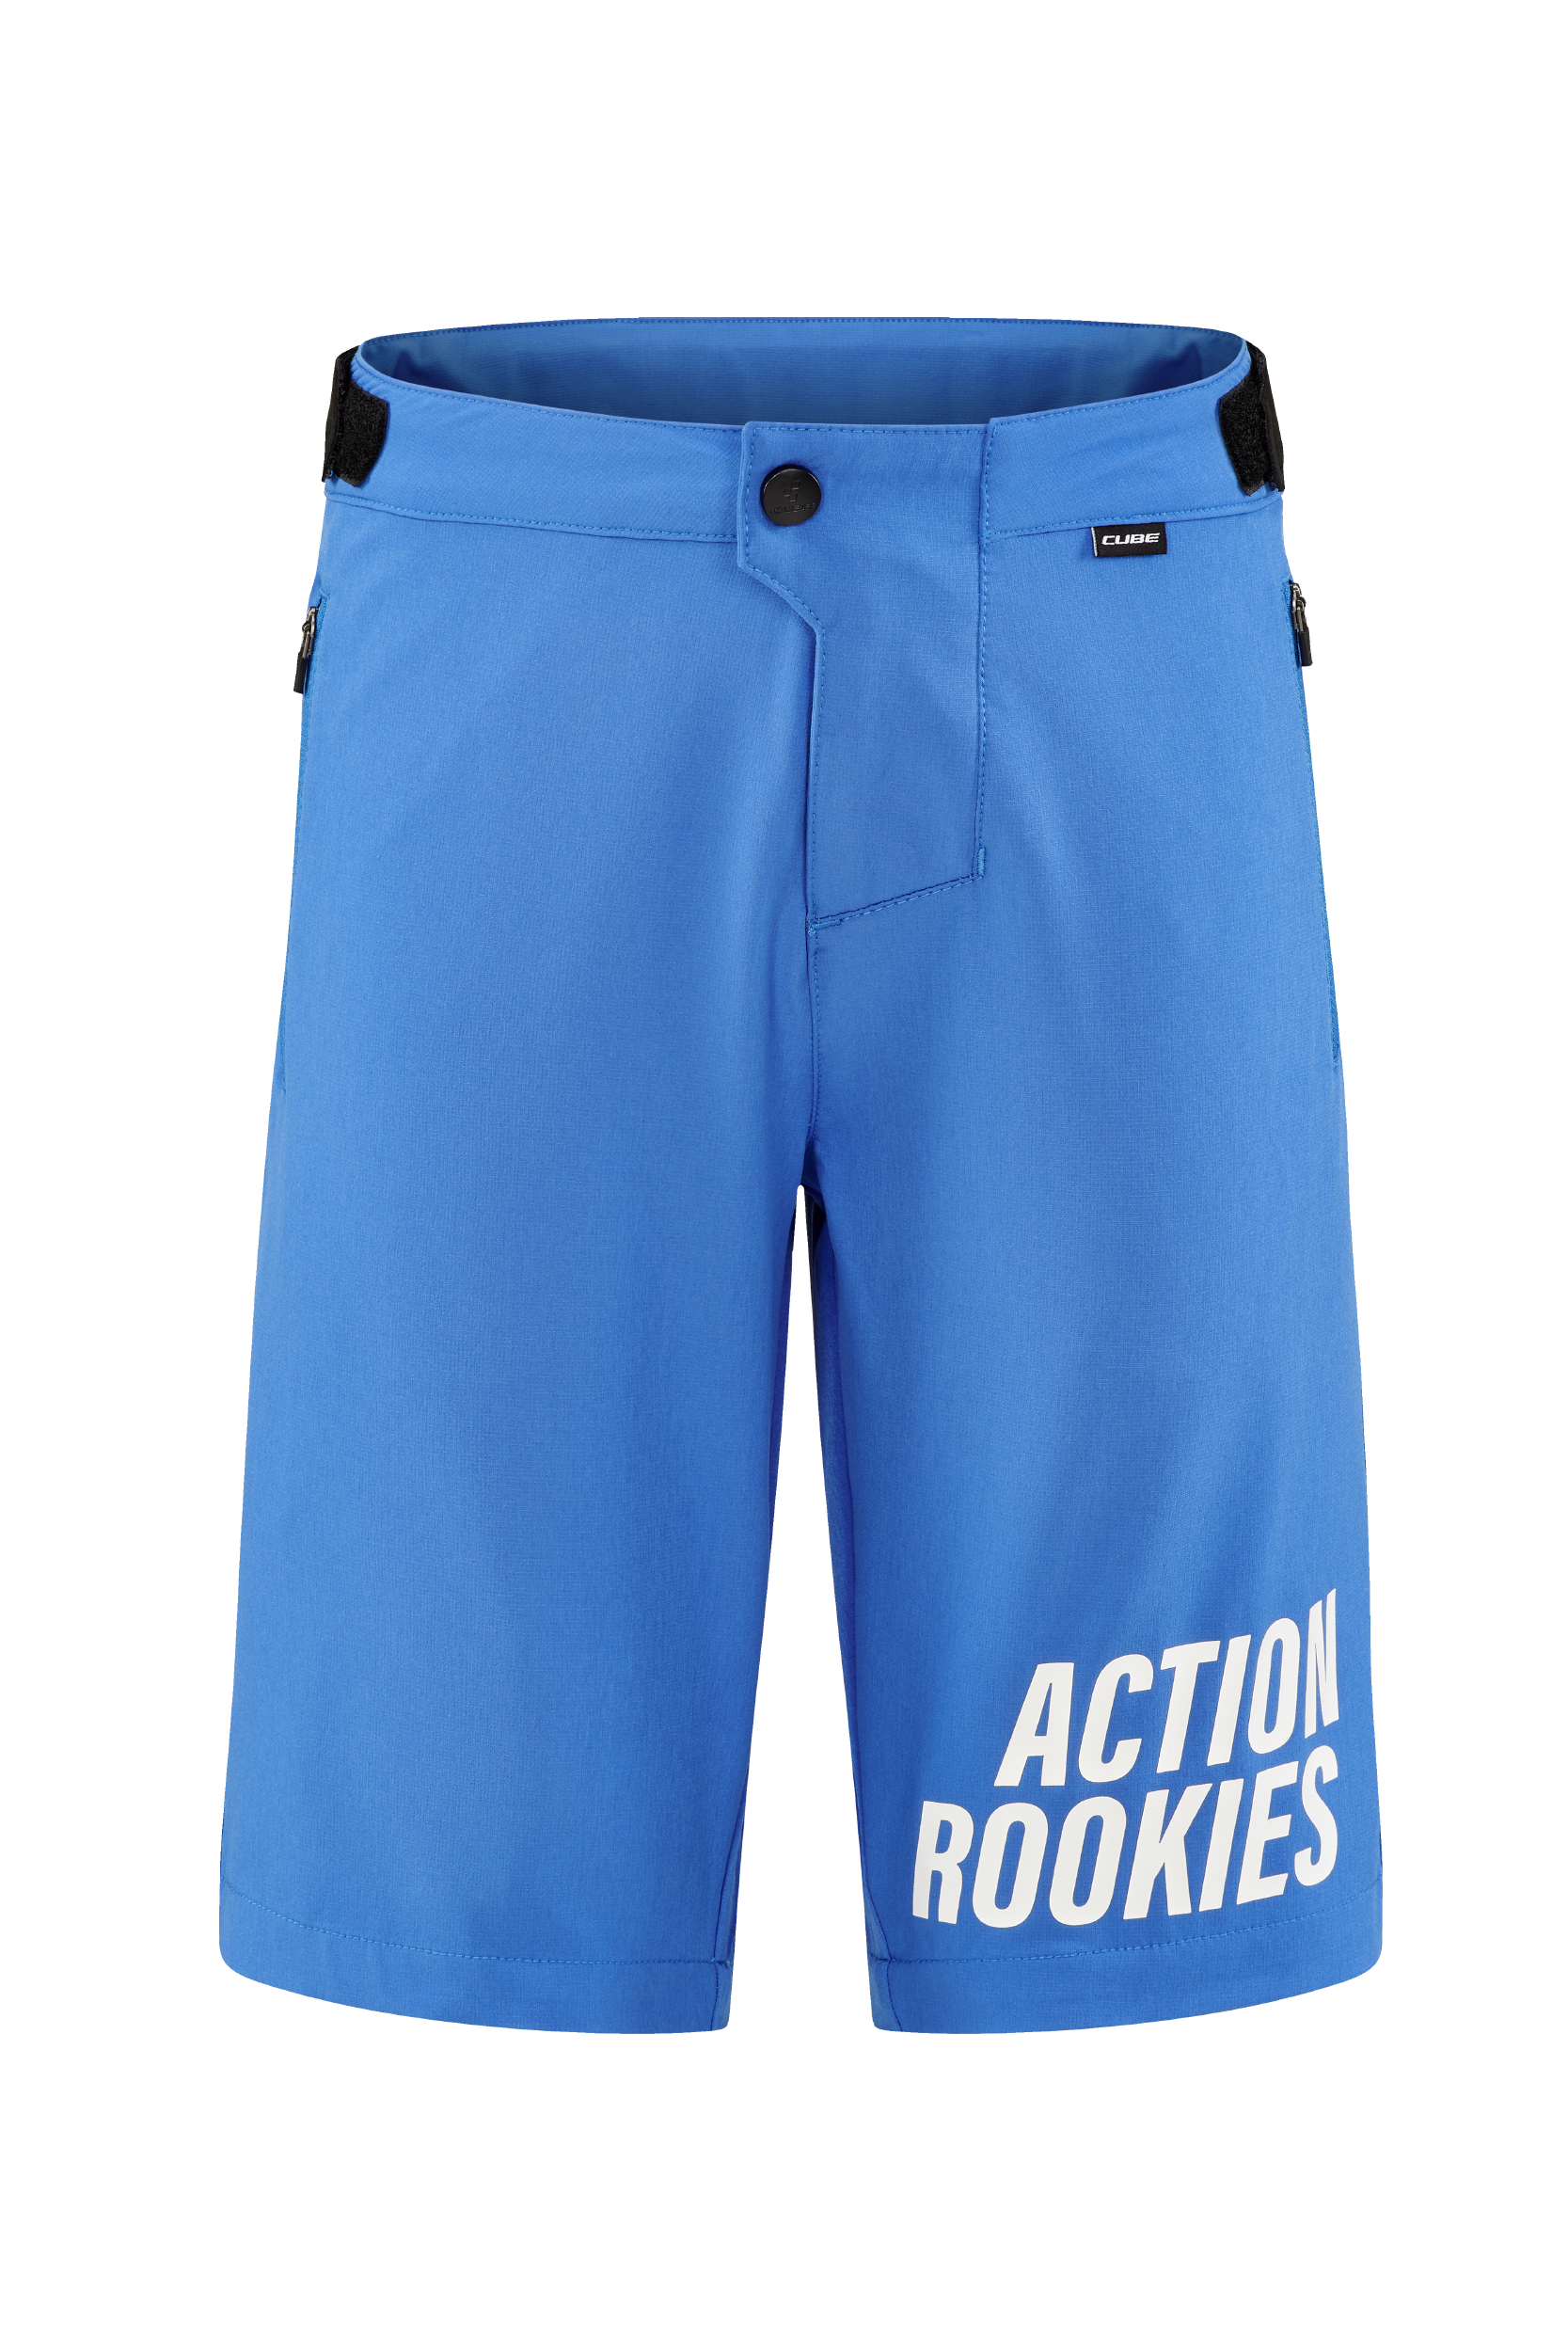 CUBE VERTEX Baggy Shorts ROOKIE X Actionteam incl. Liner Shorts